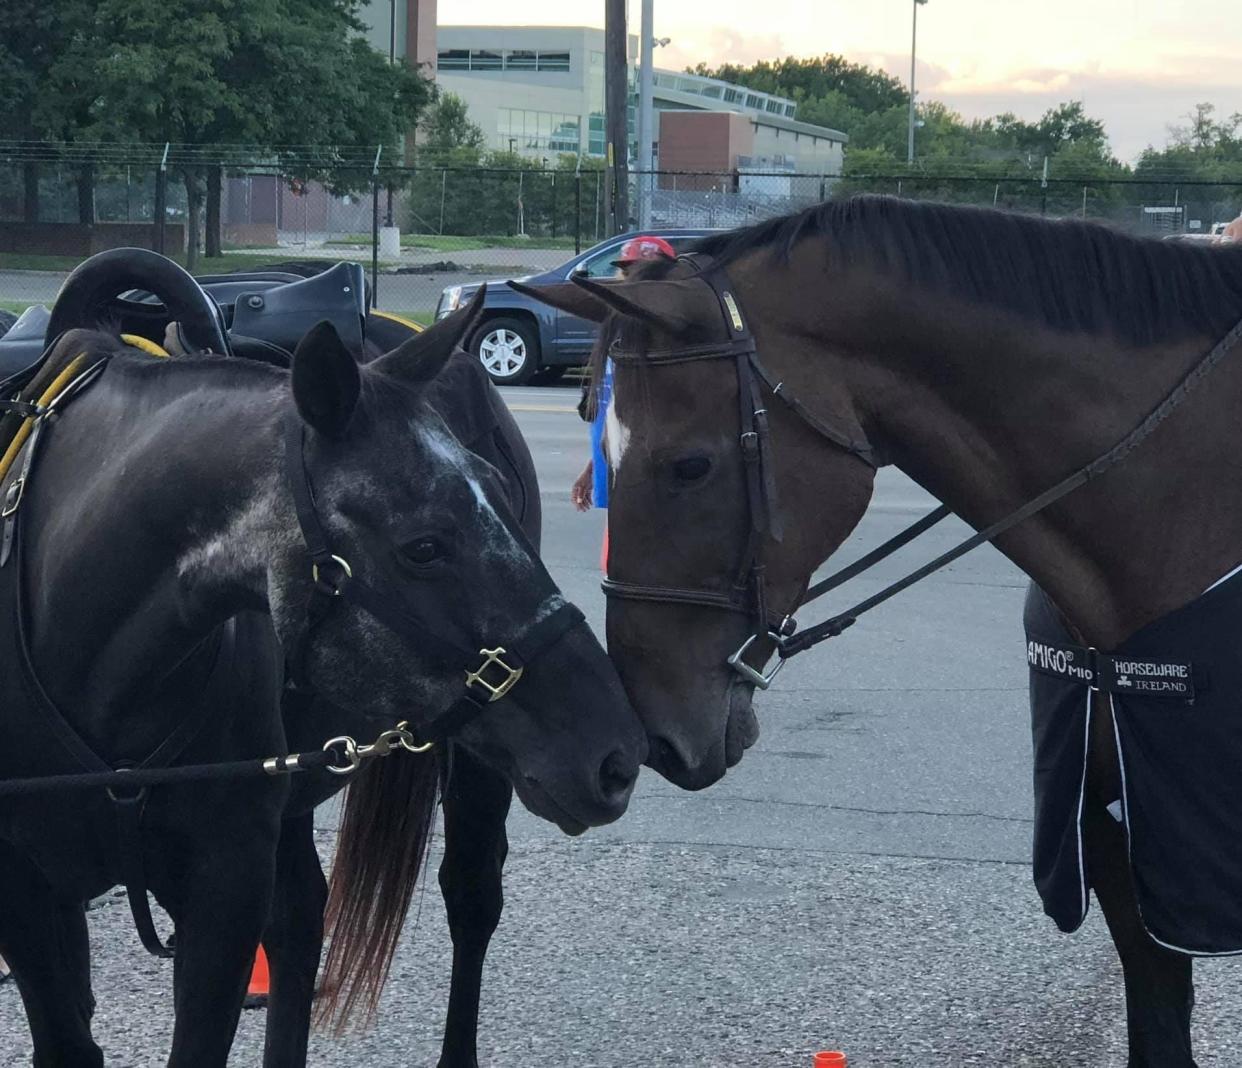 Wayne County Sheriff's Office horses Doc ,left, and Denver, right, returned to duty for Sgt. Lee Eric Smith's viewing at Swanson Funeral Home in Detroit in August 2018. Sgt. Smith had cared for and ridden both horses during his duty with the mounted division of the sheriff's office. Both horses, now deceased, will be interred at the Michigan War Dog Memorial in Lyon Township.